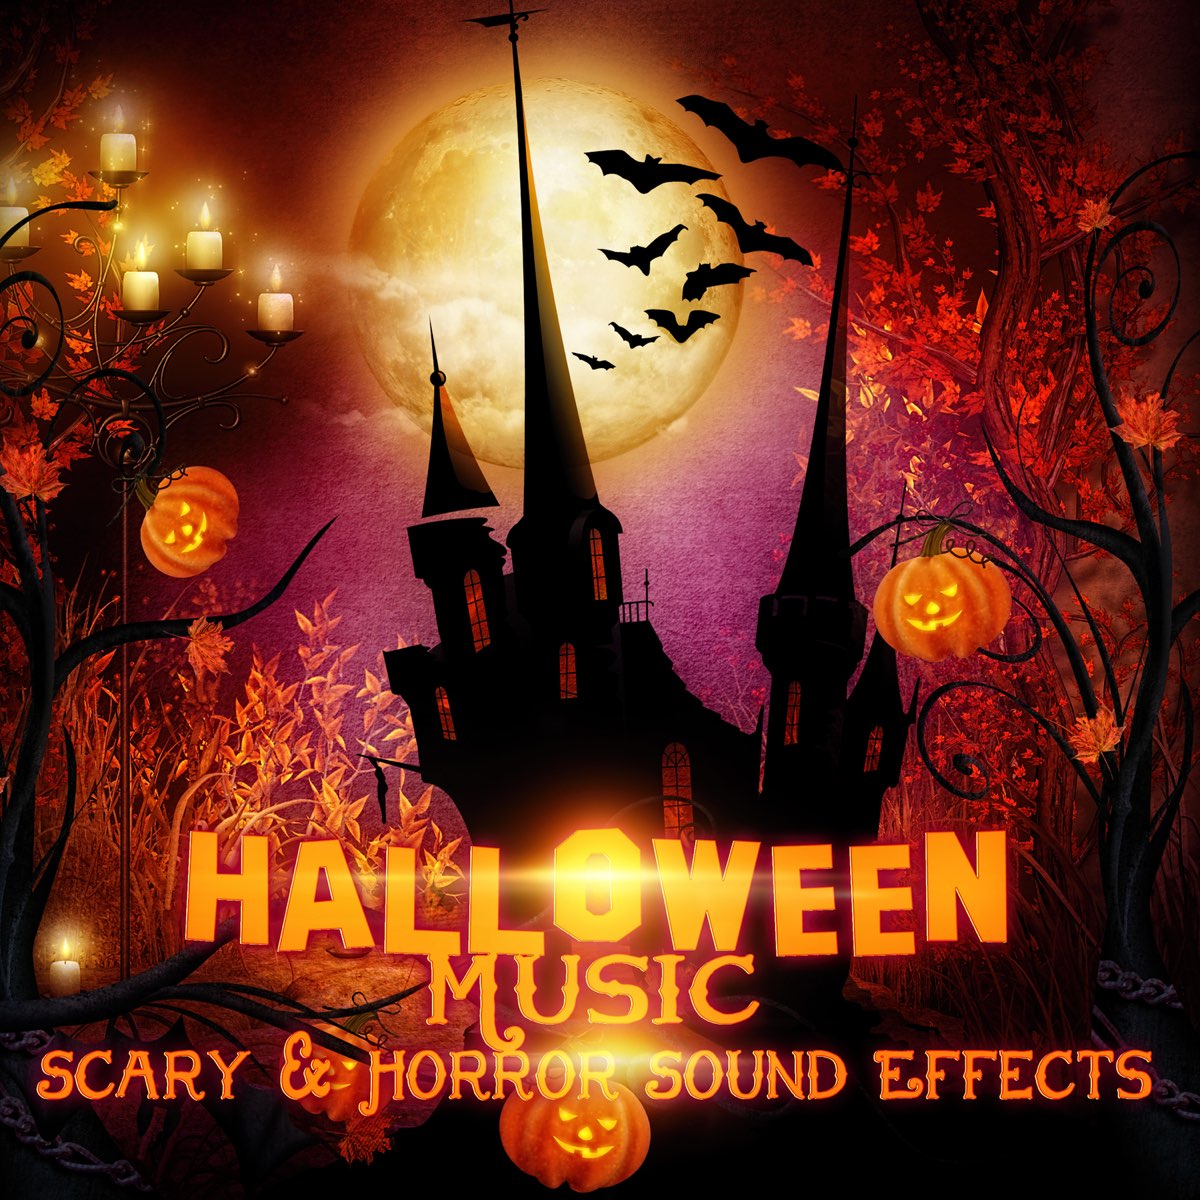 Halloween Music: Scary & Horror Sound Effects của Horror Music Collection  trên Apple Music